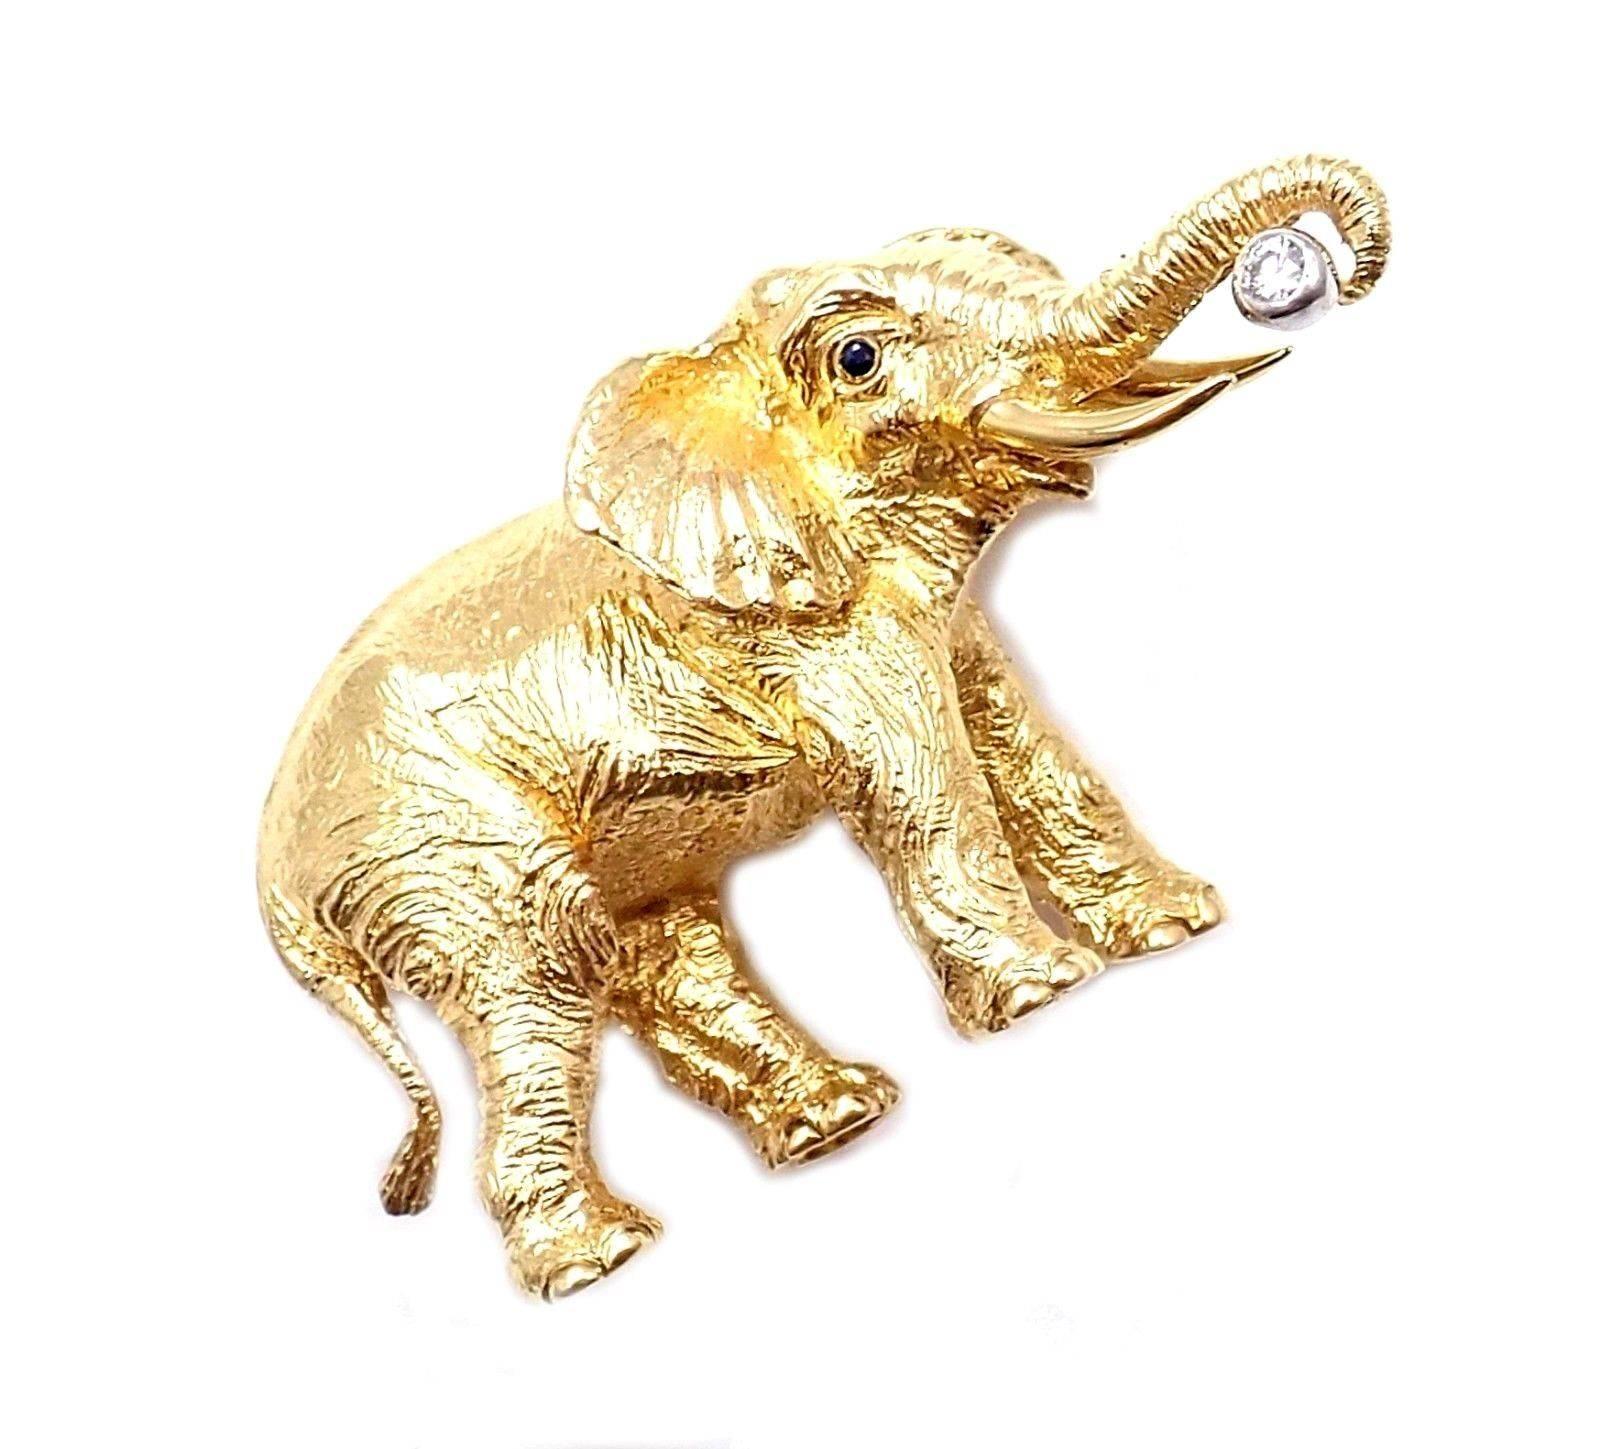 18k Yellow Gold Diamond Sapphire Elephant Brooch Pin by Tiffany & Co. 
With 1 round brilliant cut diamonds VS1 clarity, G color total weight approx. .05ct
2 sapphire eyes
Details: 
Measurements: 47mm x 27mm
Weight: 22.1 grams
Stamped Hallmarks: